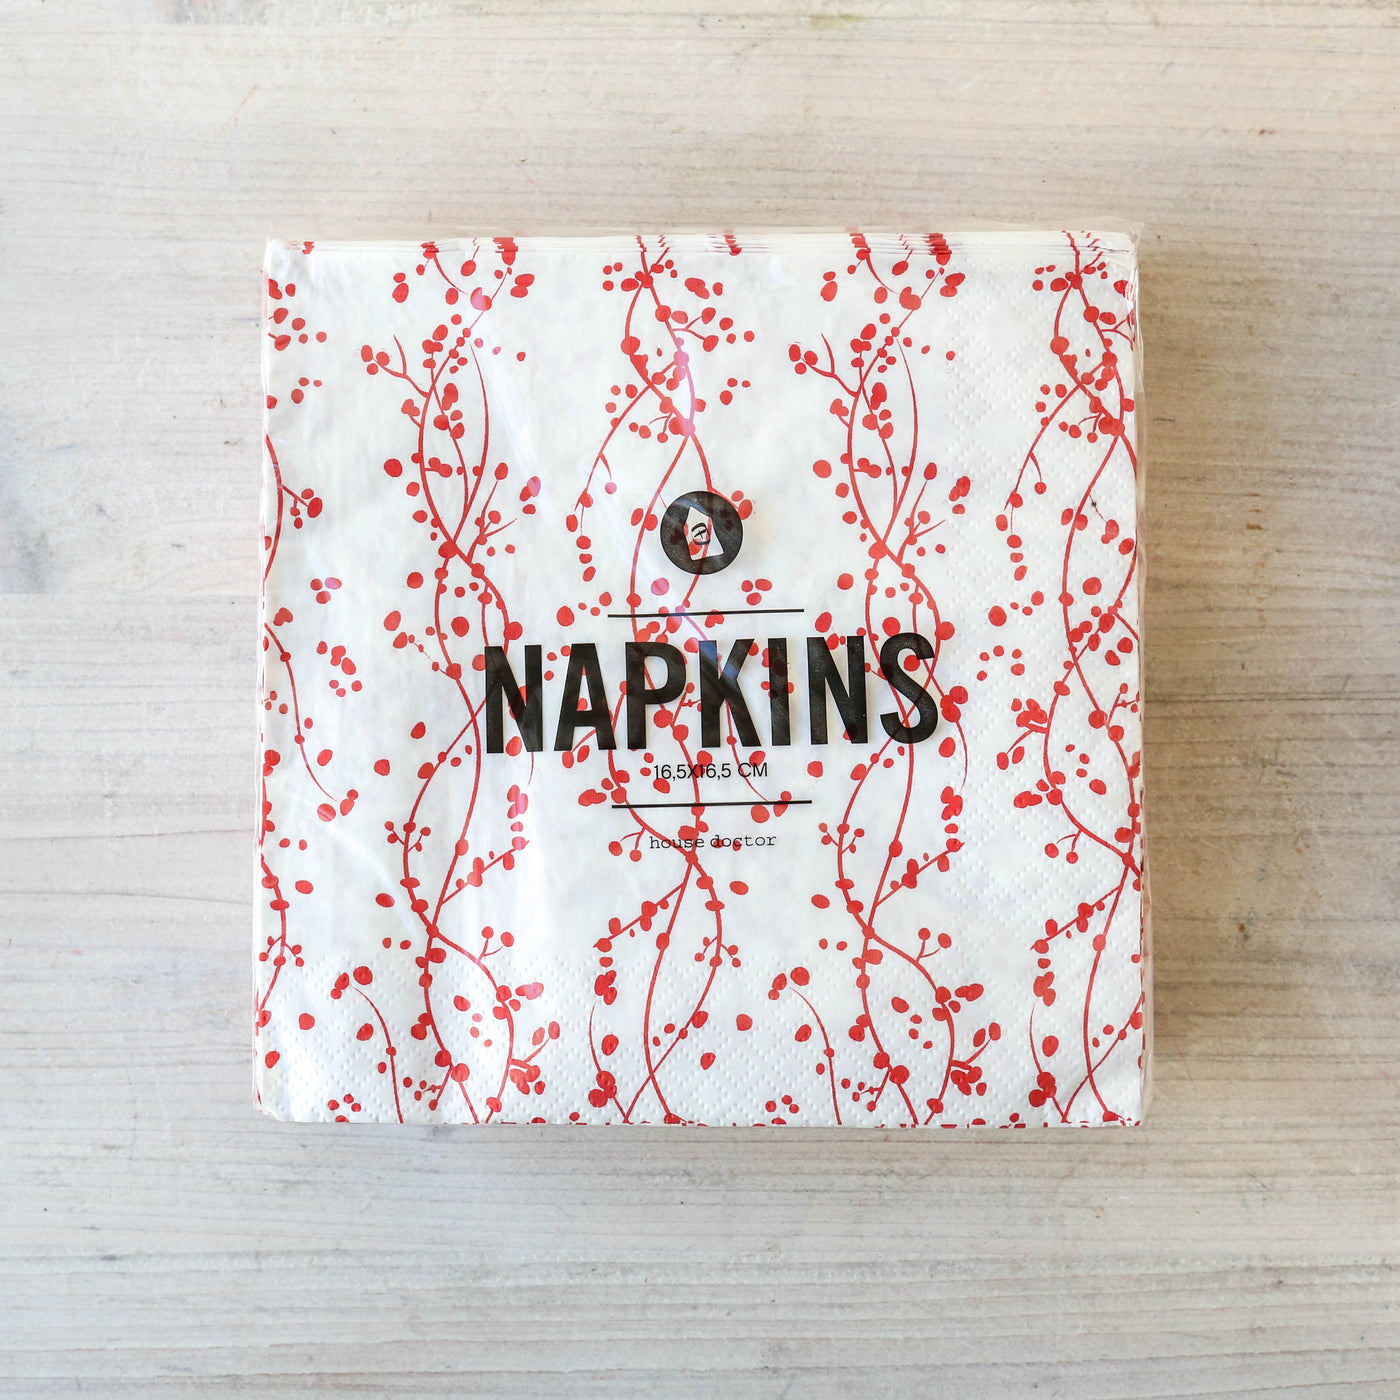 Pack of Paper Napkins - Red Berries